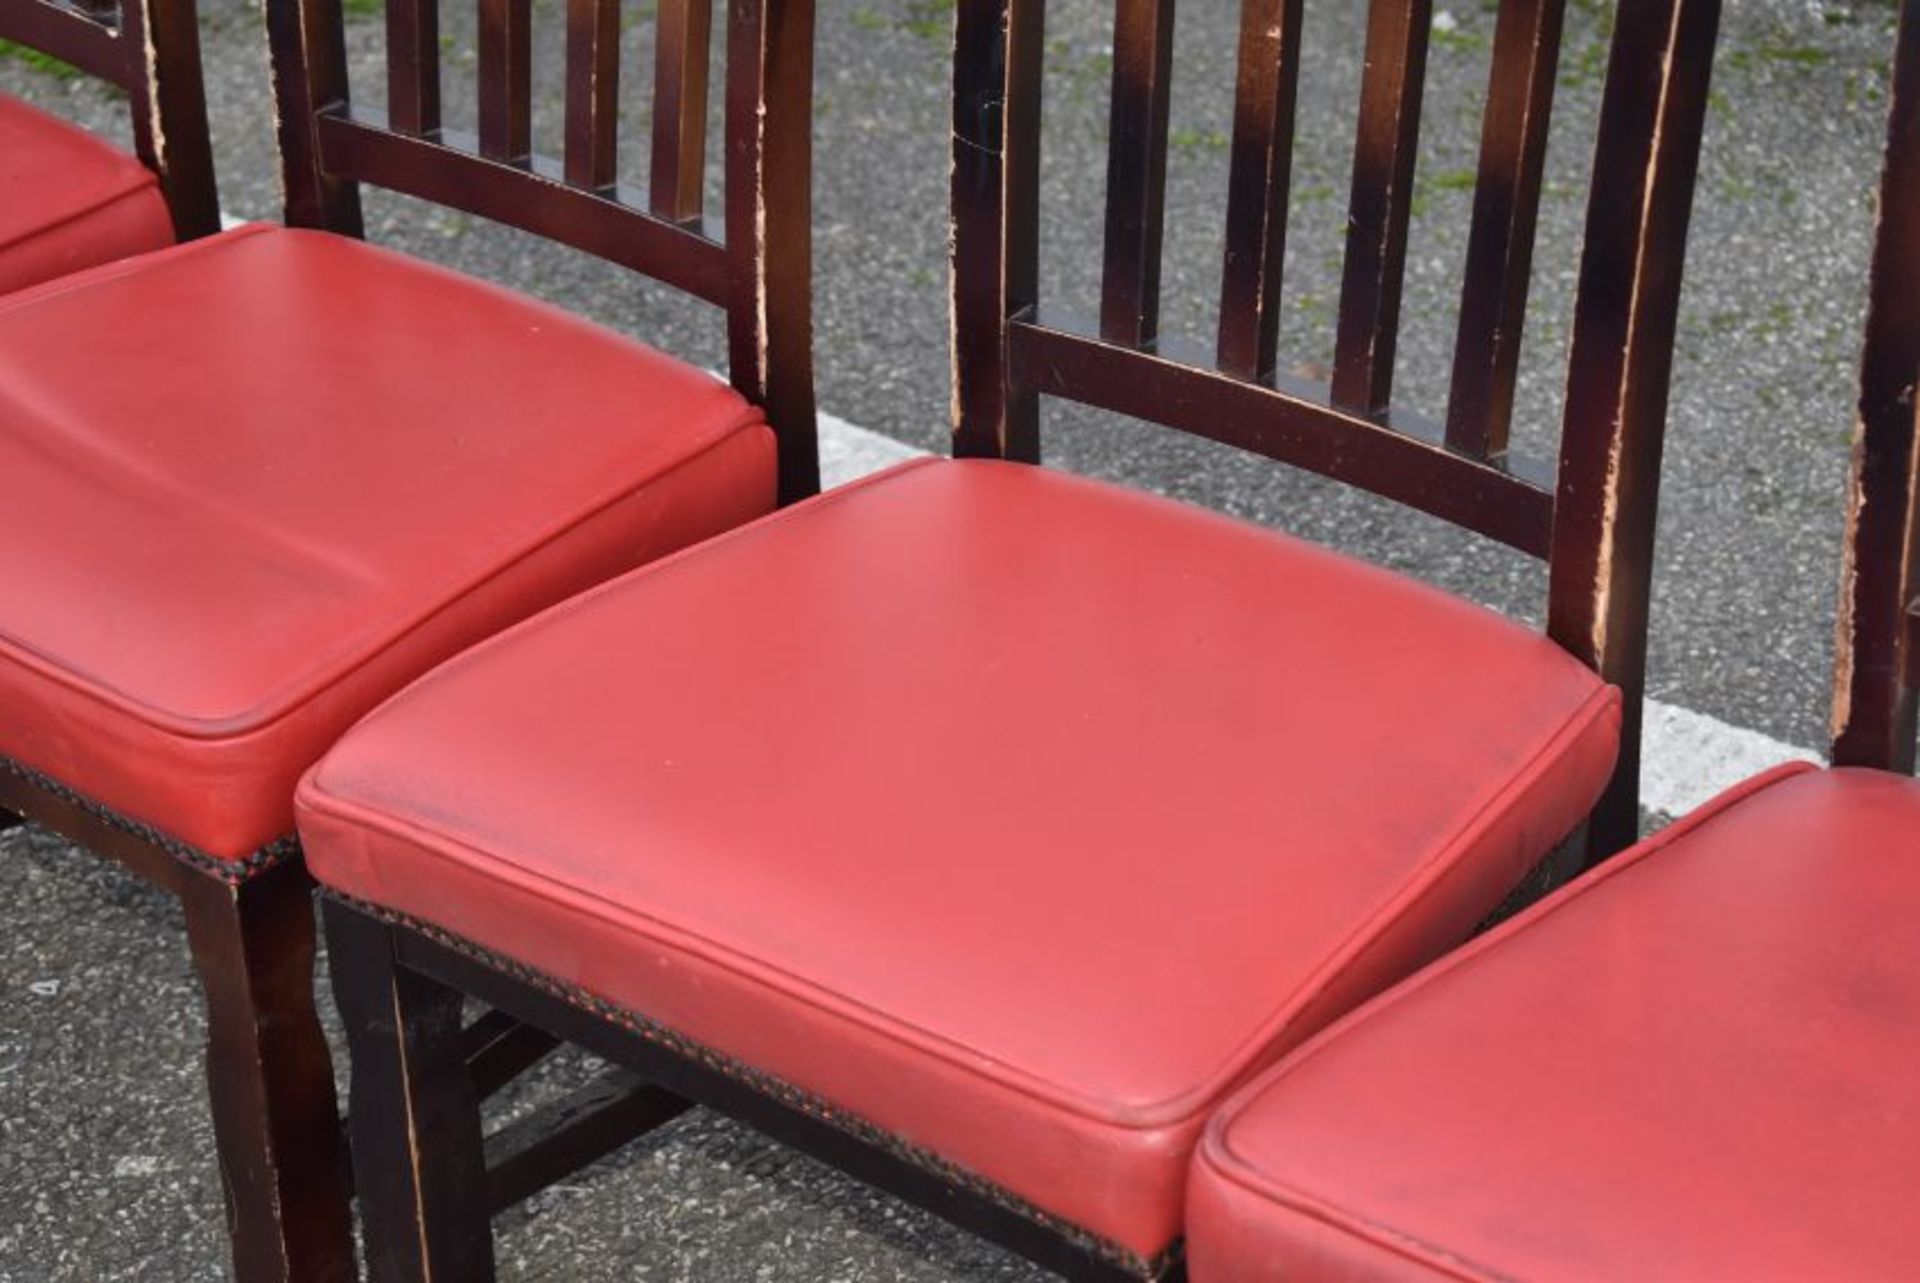 16 x Restaurant Dining Chairs With Dark Stained Wood Finish and Red Leather Seat Pads - Recently - Image 2 of 6